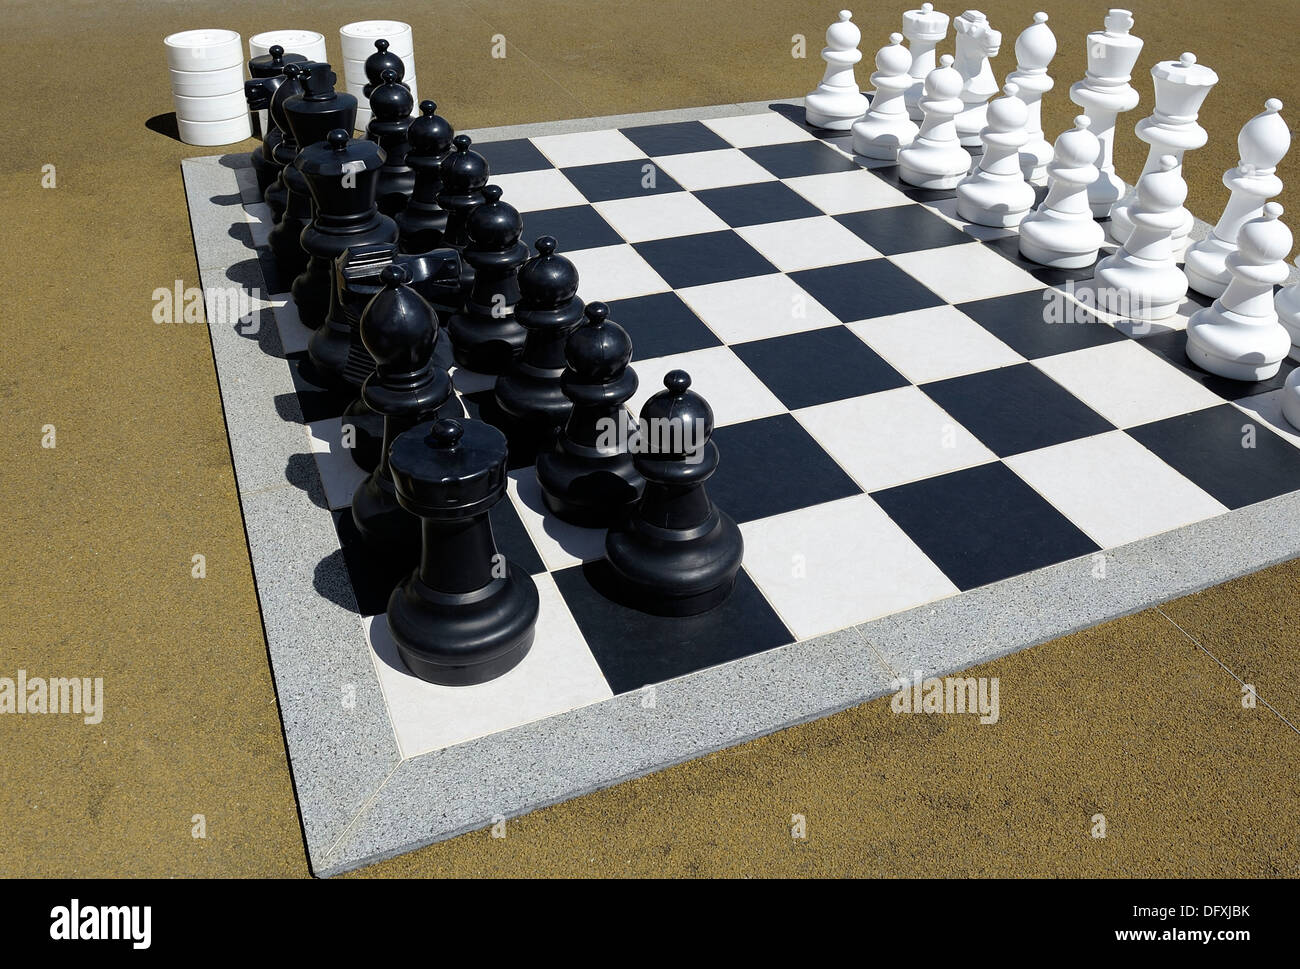 Giant chess set in a hotel play area Stock Photo - Alamy